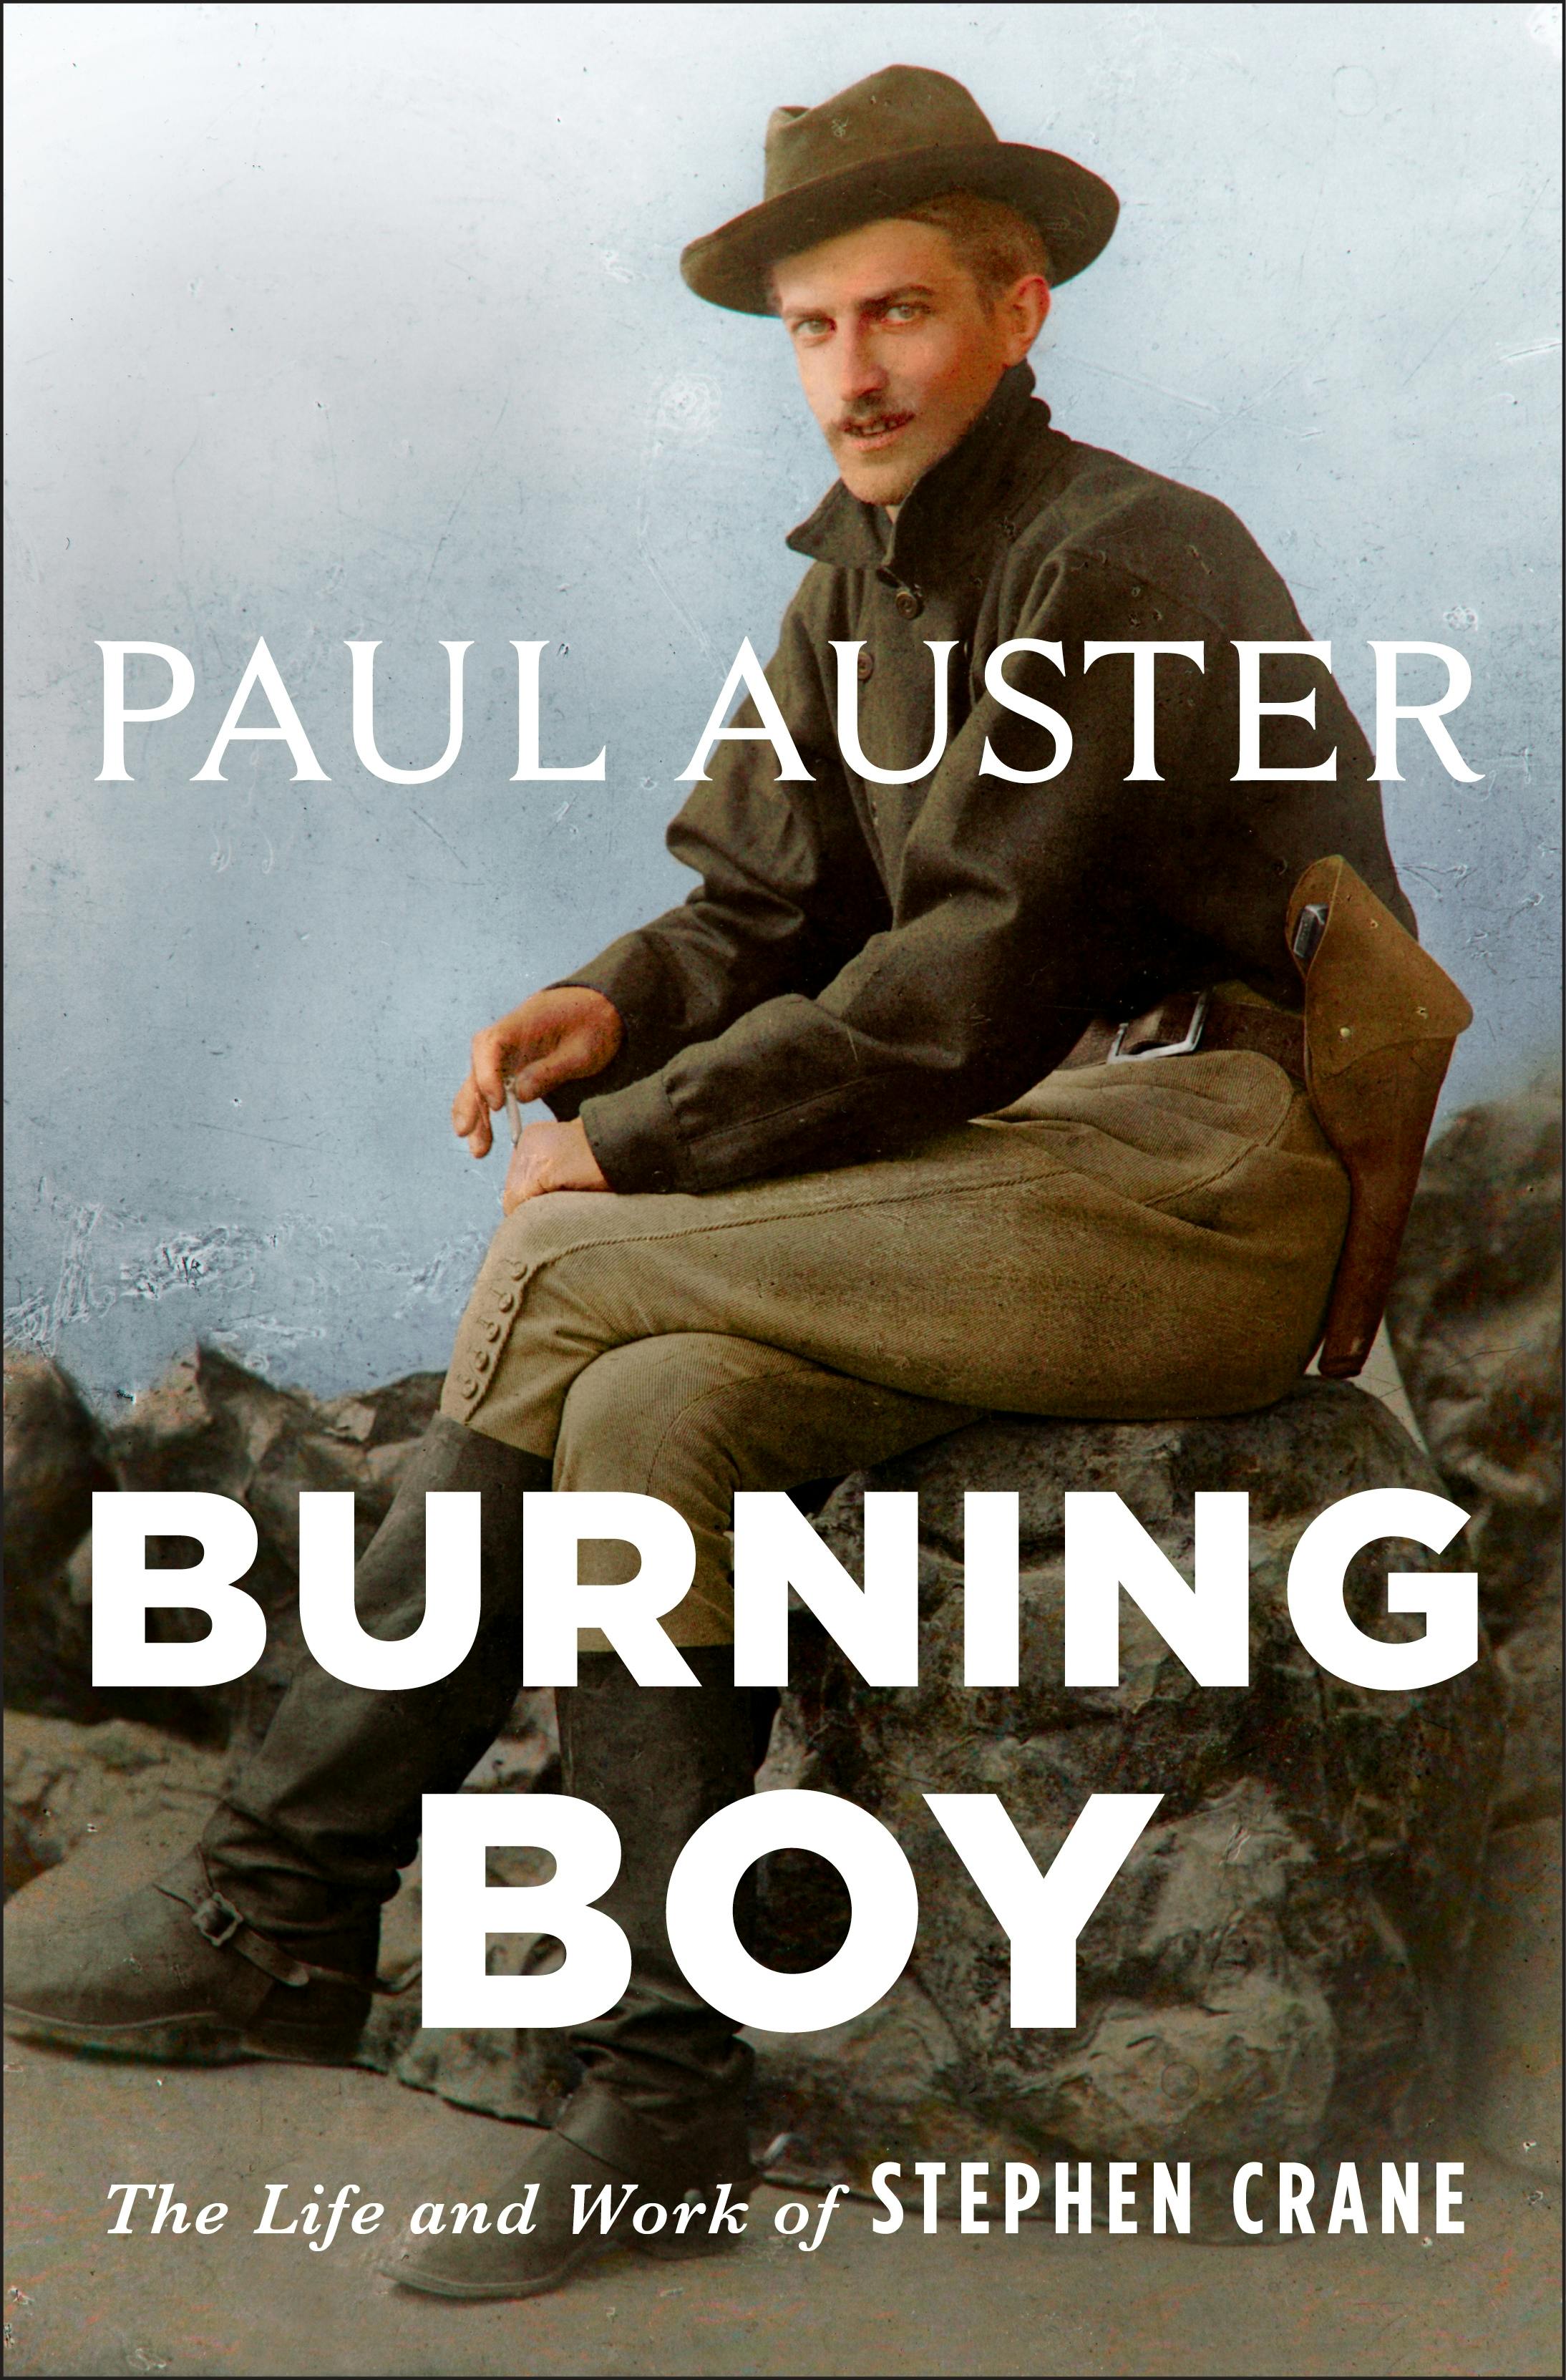 Winter Journal,' by Paul Auster - The New York Times